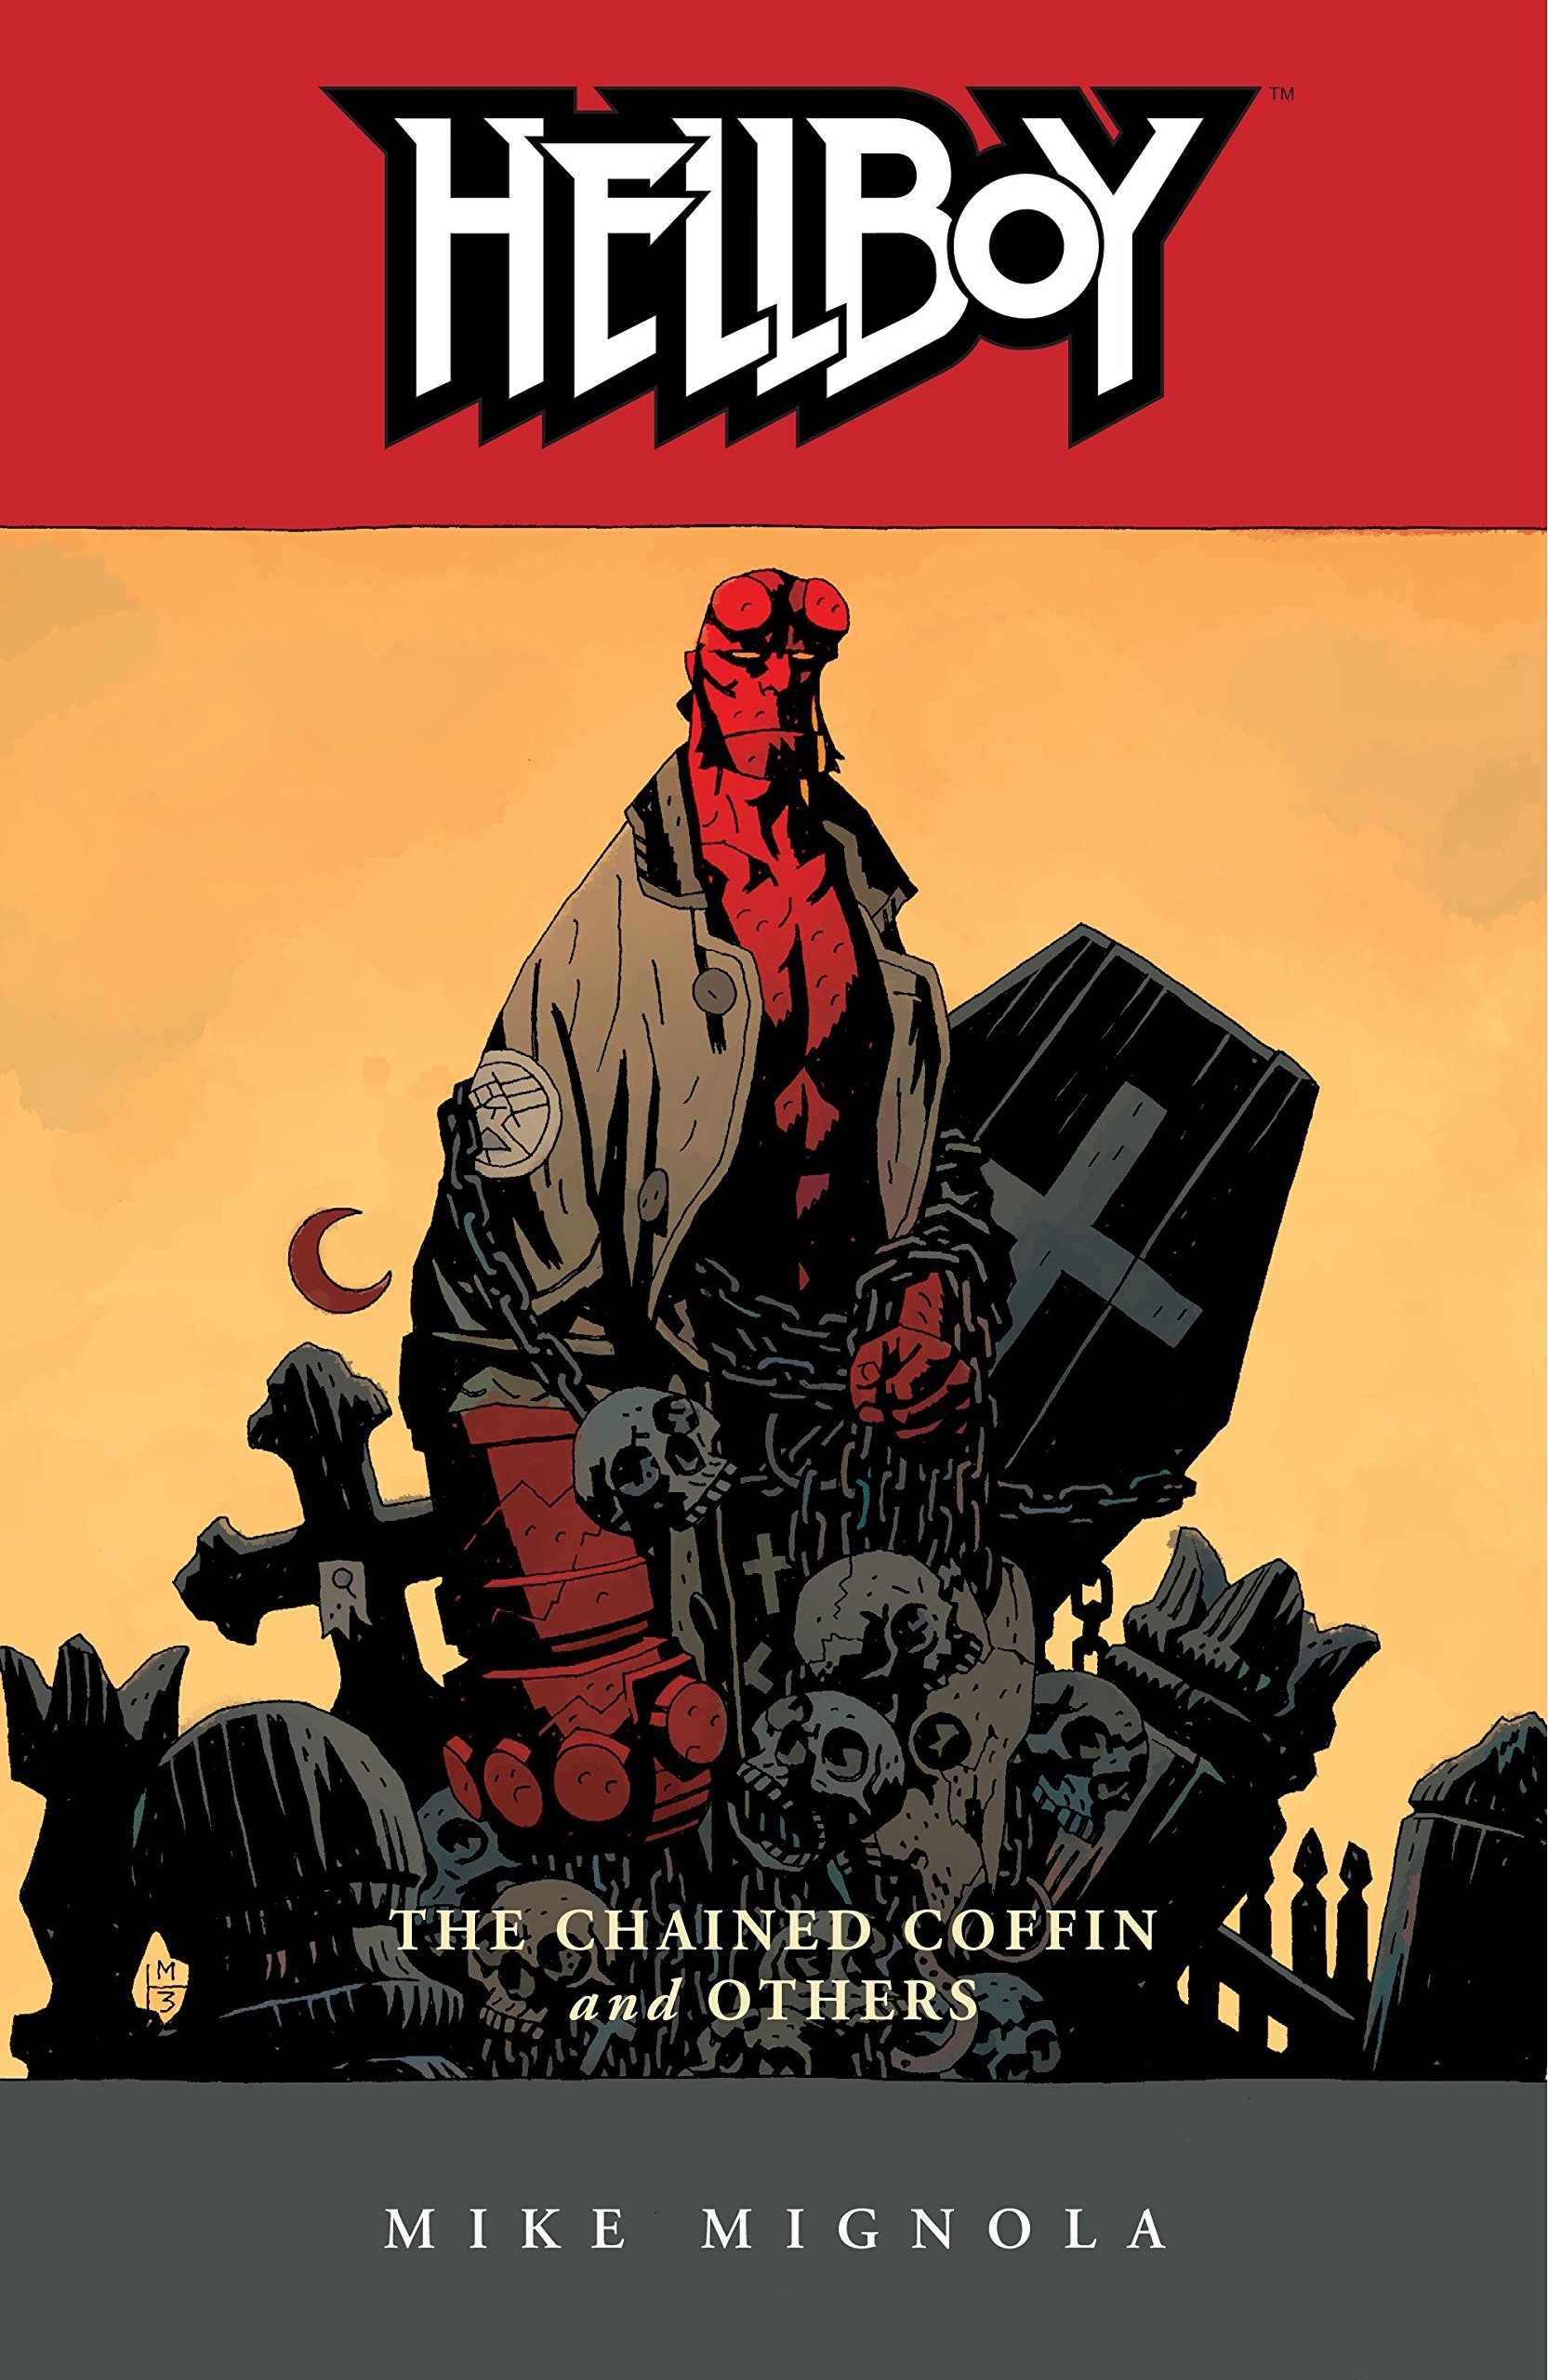 Hellboy vol 3: The Chained Coffin and Others story by Mike Mignola.